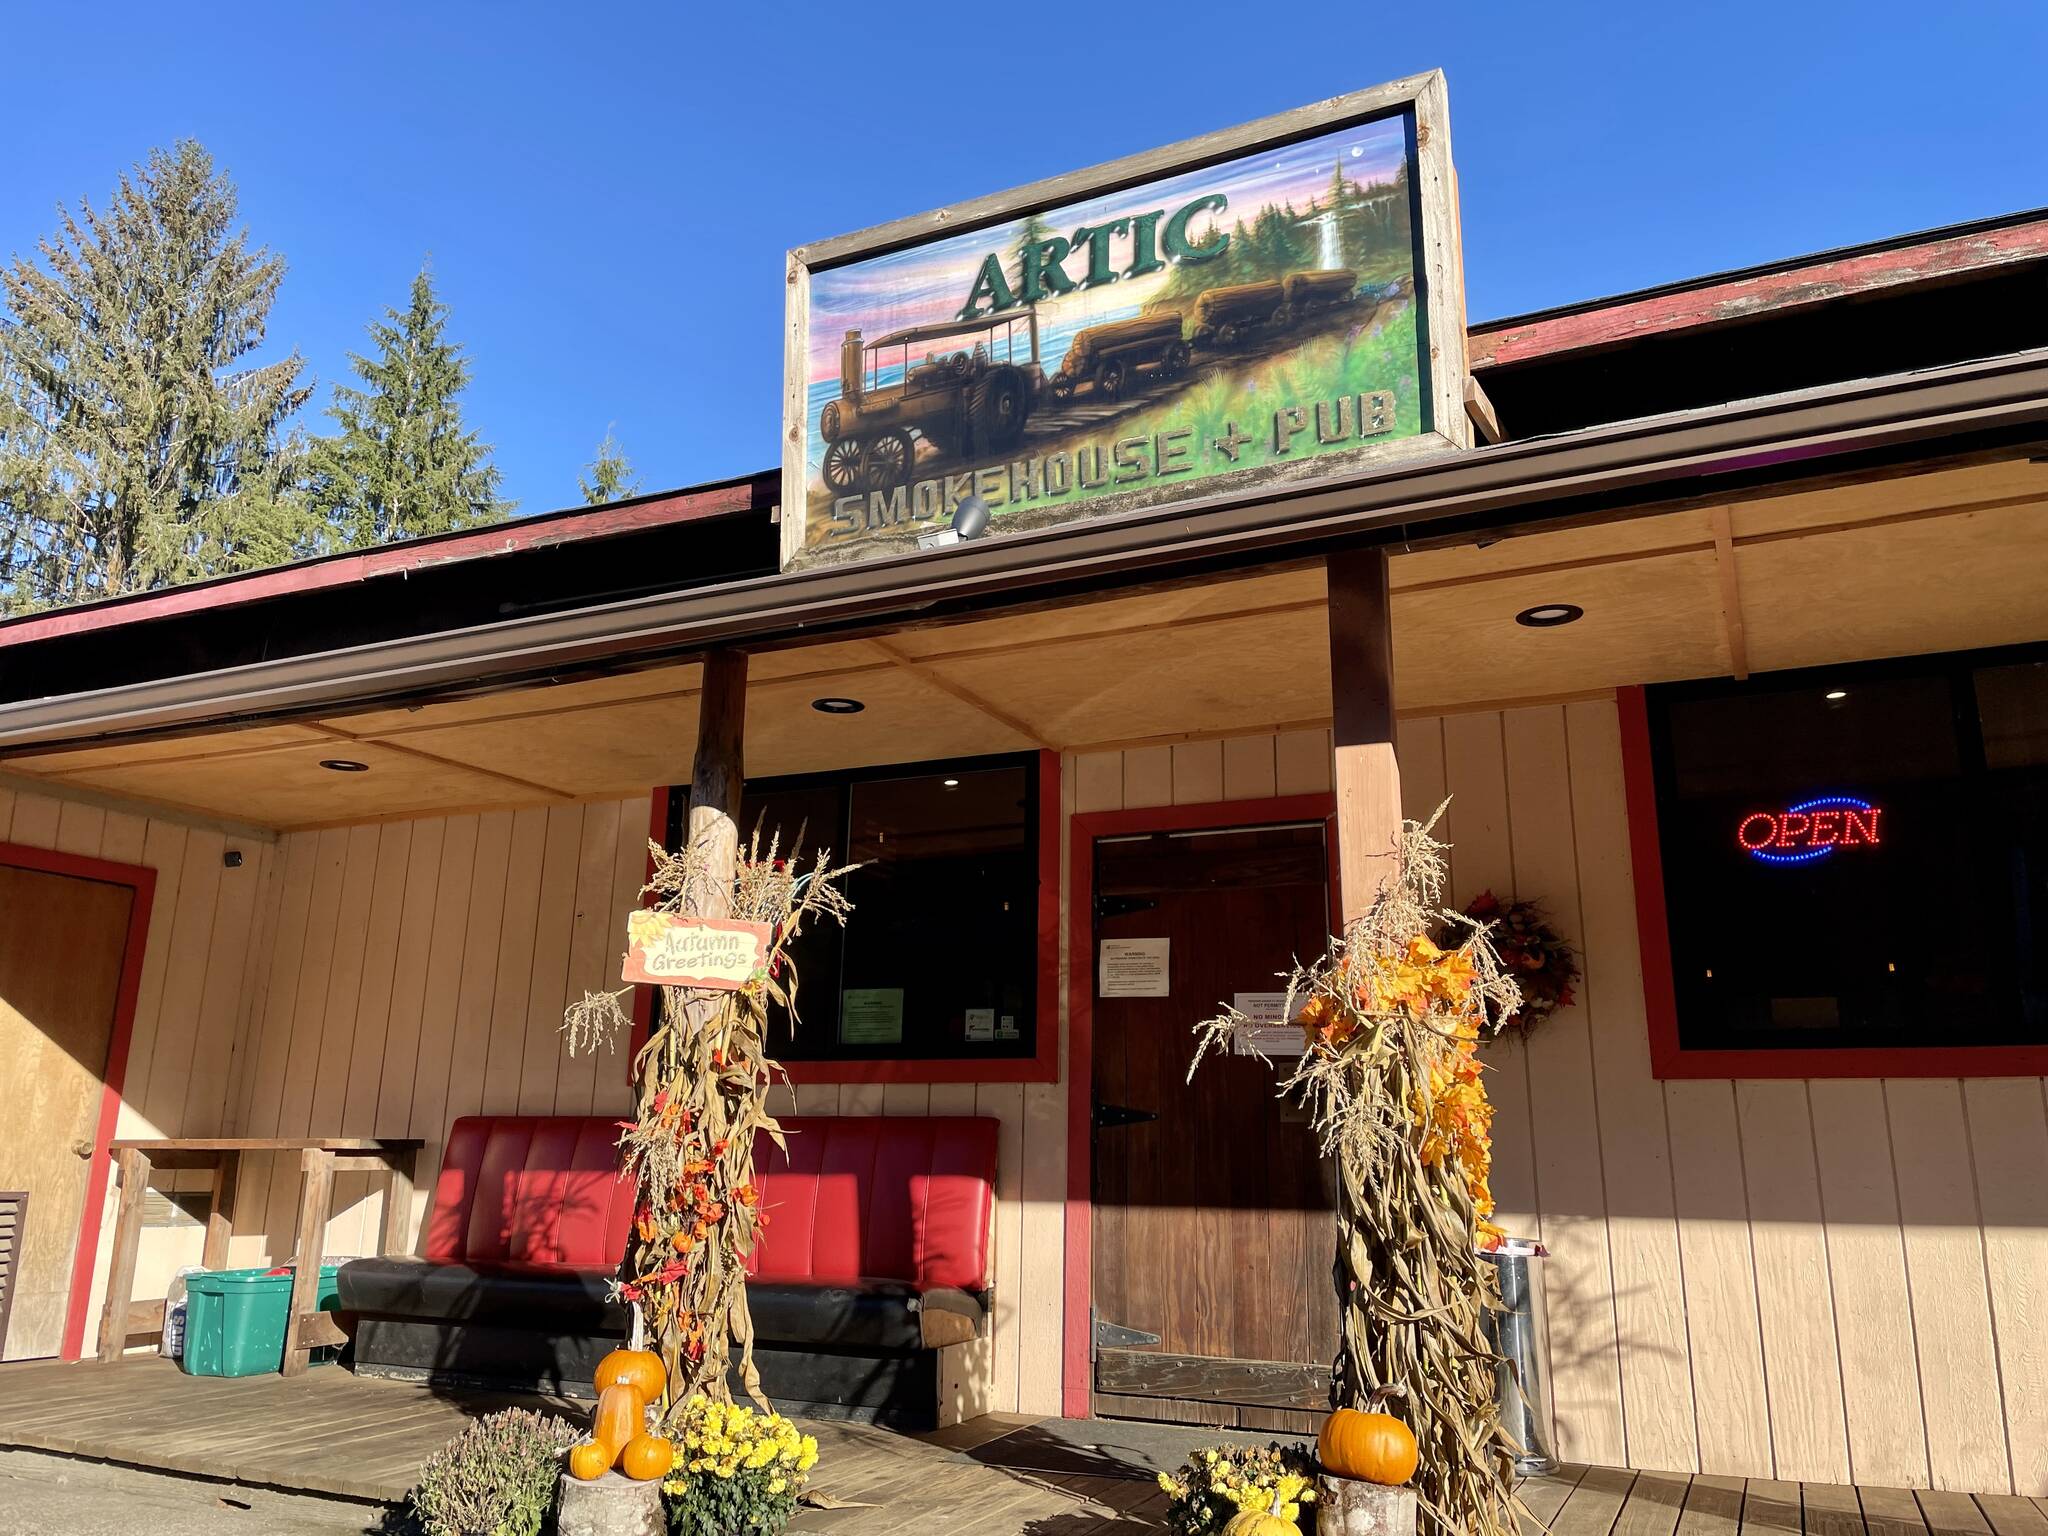 The Artic Pub stands open once again, following a fire that shuttered the bar for months. (Michael S. Lockett / The Daily World)